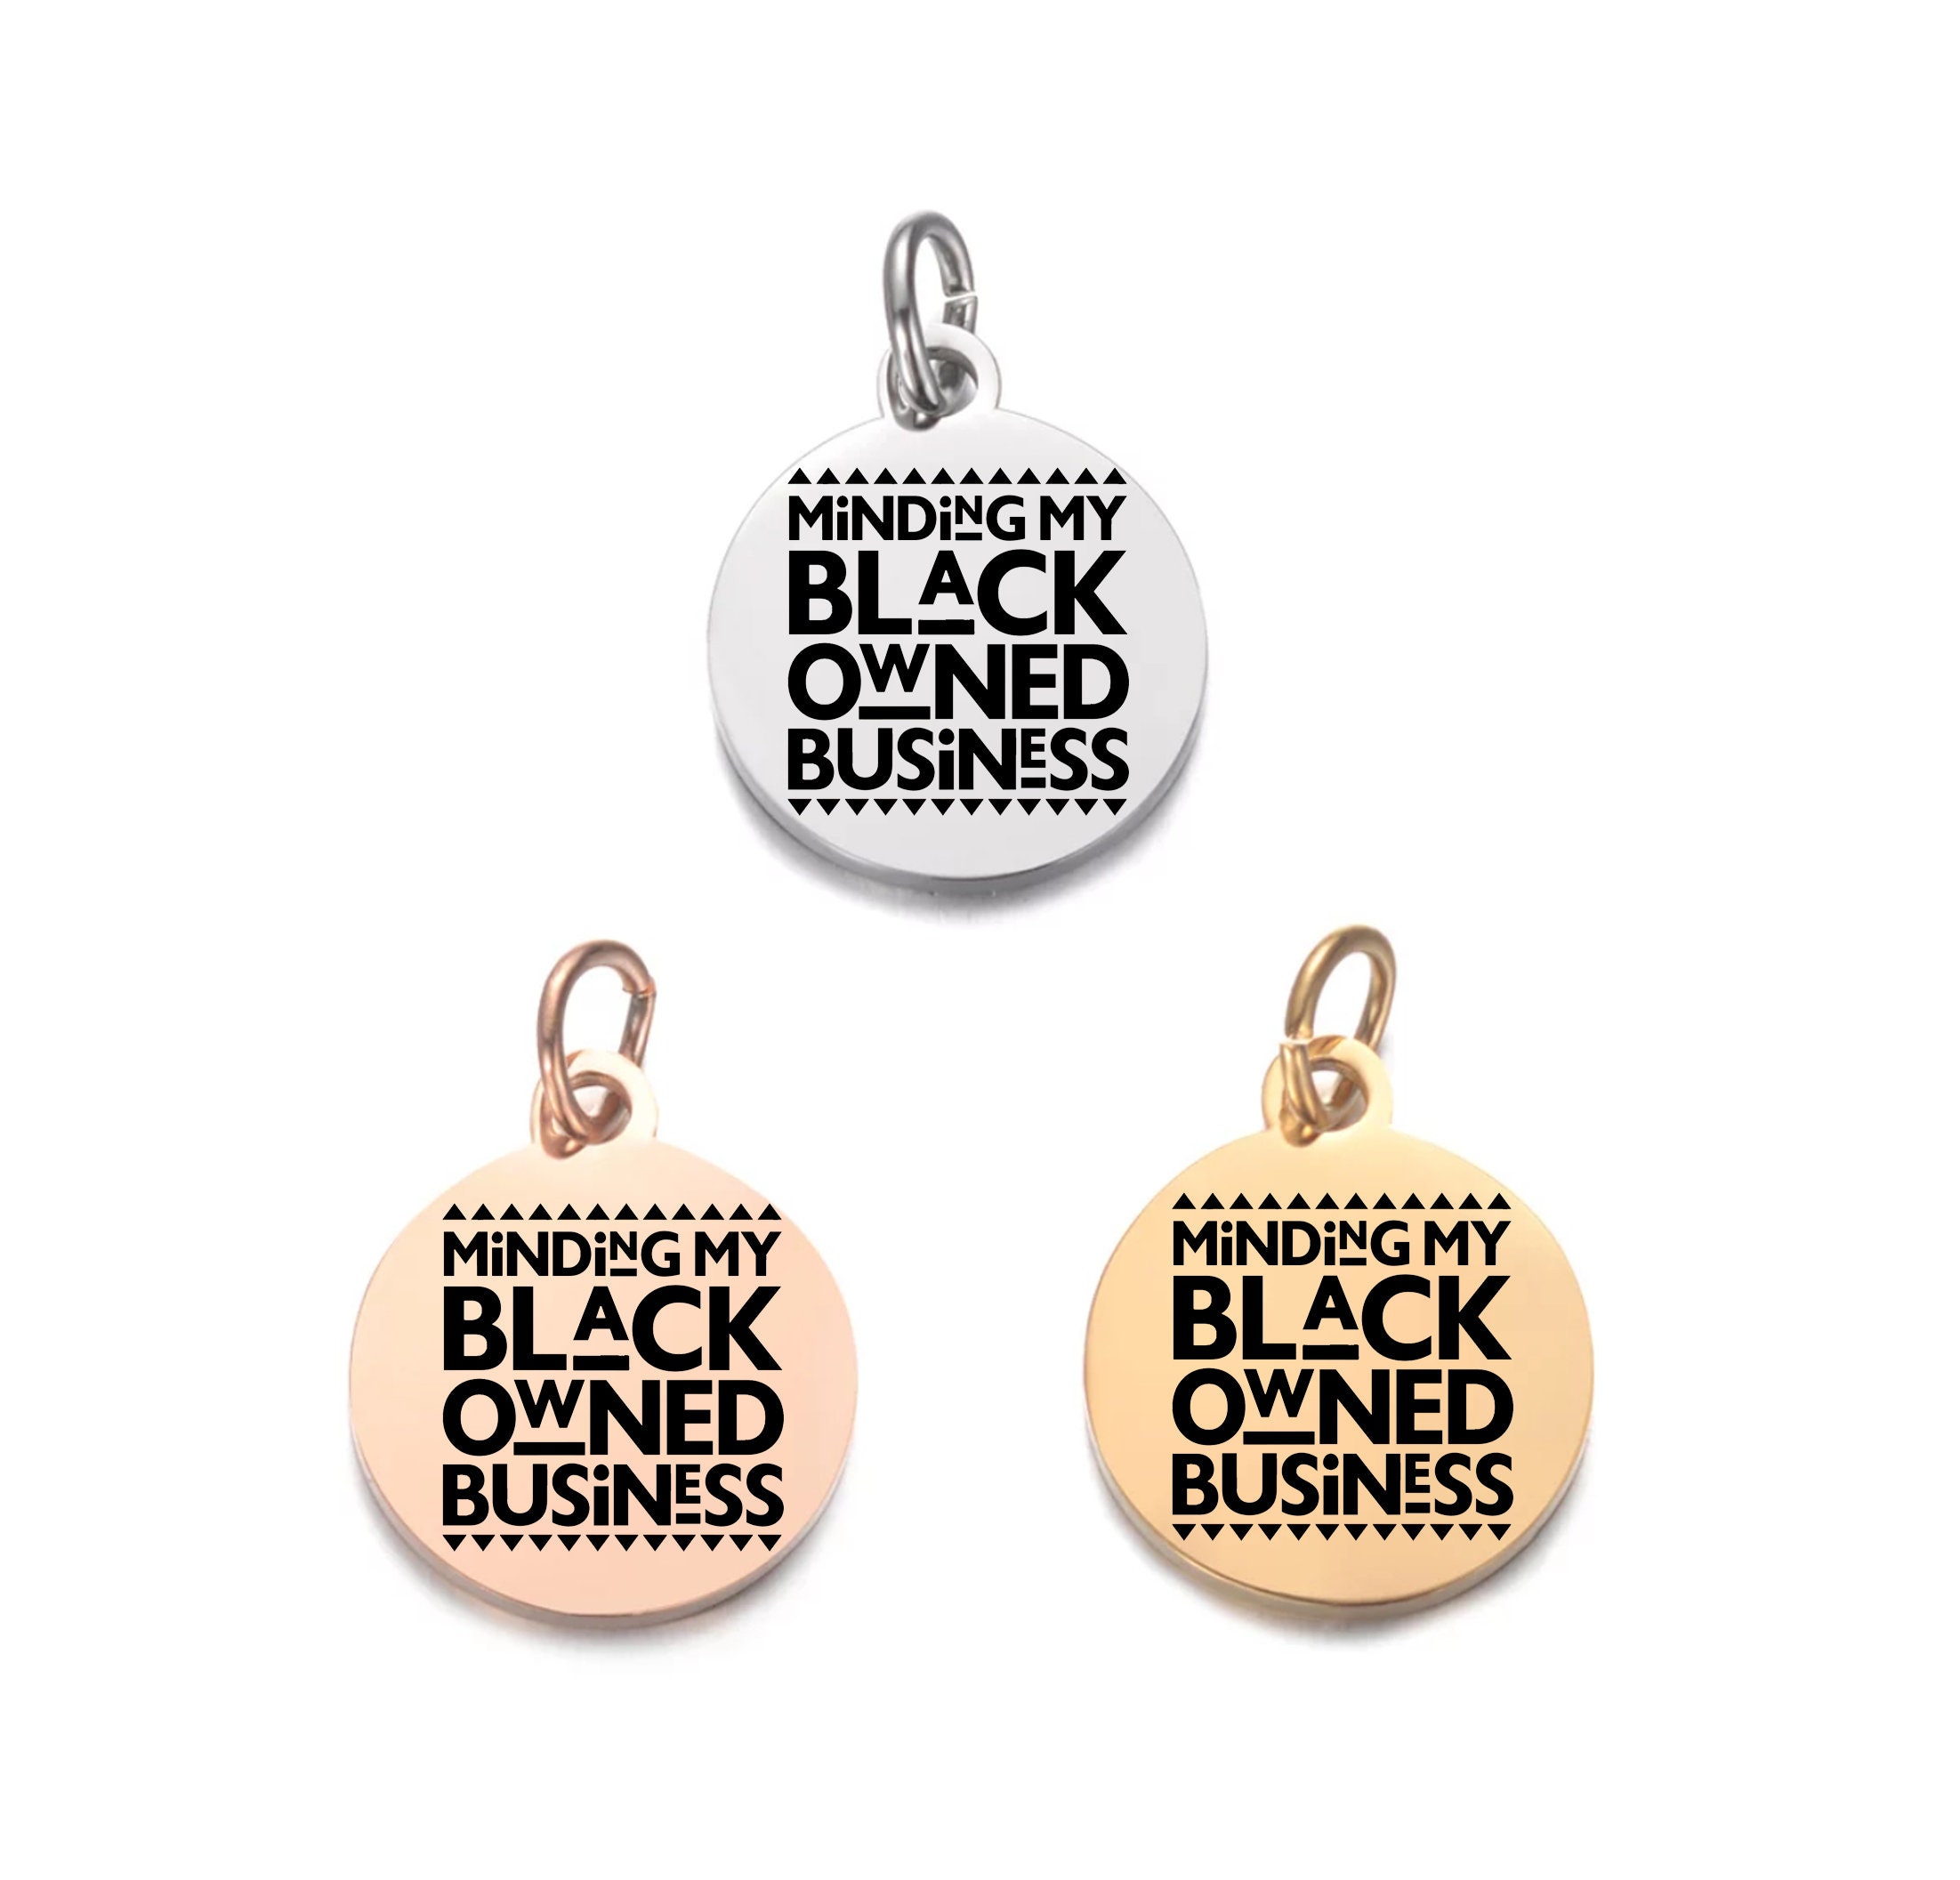 Personalized Charms Laser Engraved Charms Jewelry Supplies I/'m Black Mixed With Black Gold-Silver-Rose Gold Charm Melanin Charm